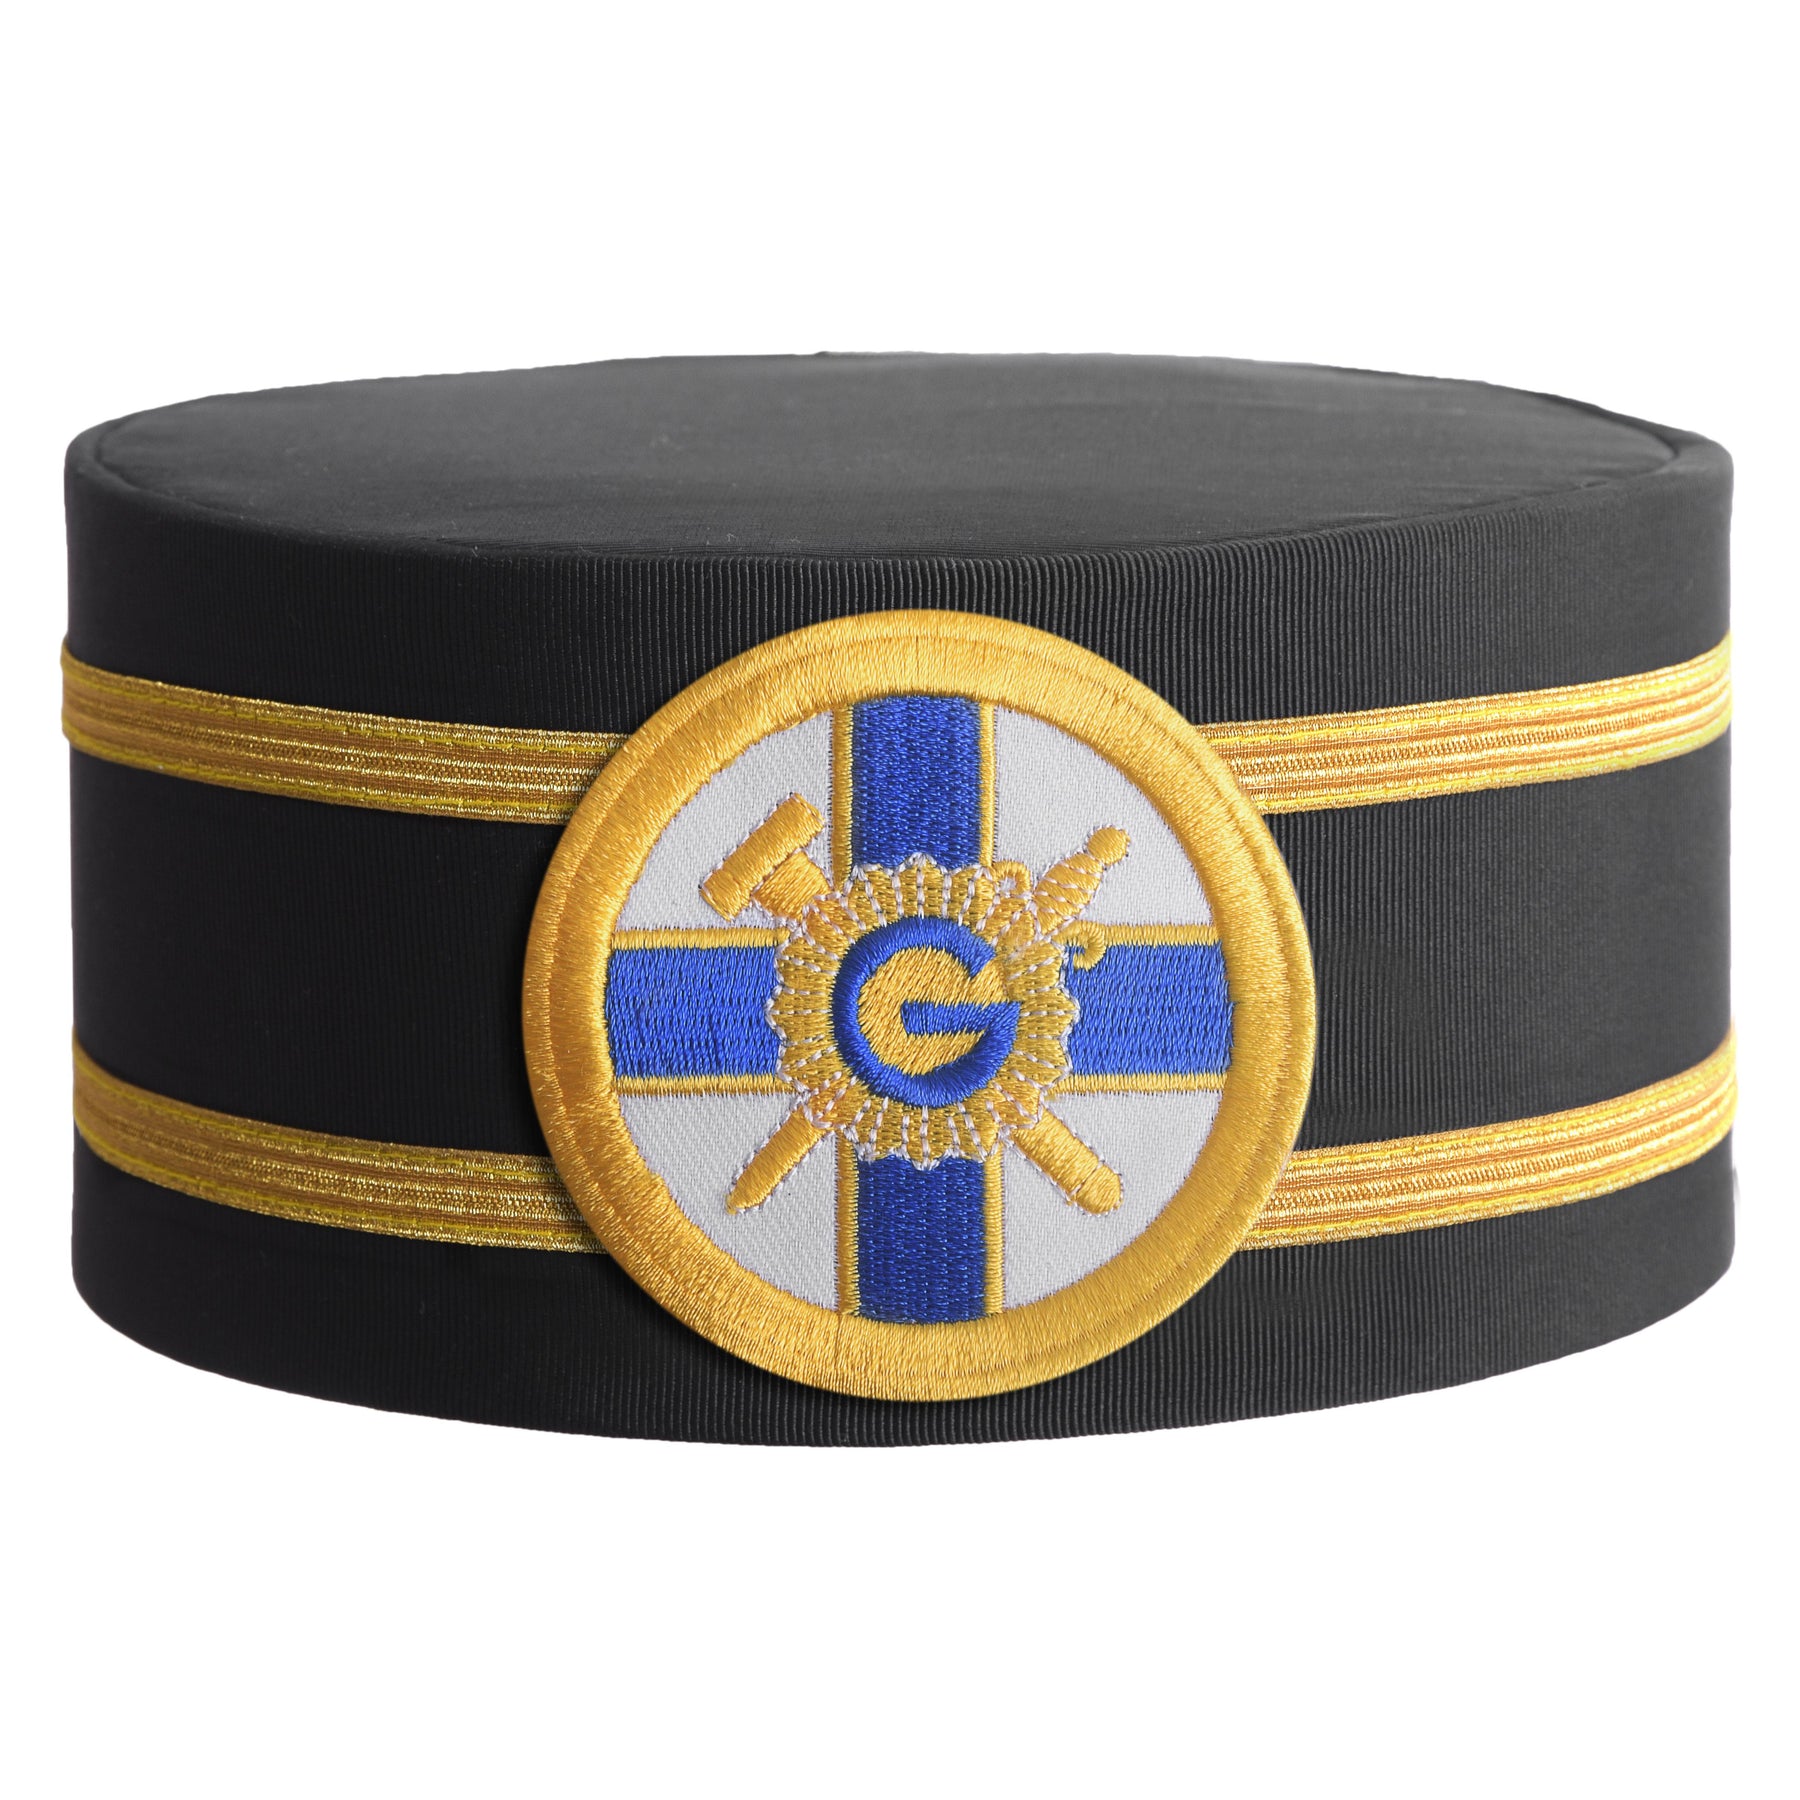 Eminent Prior Knights of the York Cross of Honour Crown Cap - Round Patch With Two Gold Braids - Bricks Masons